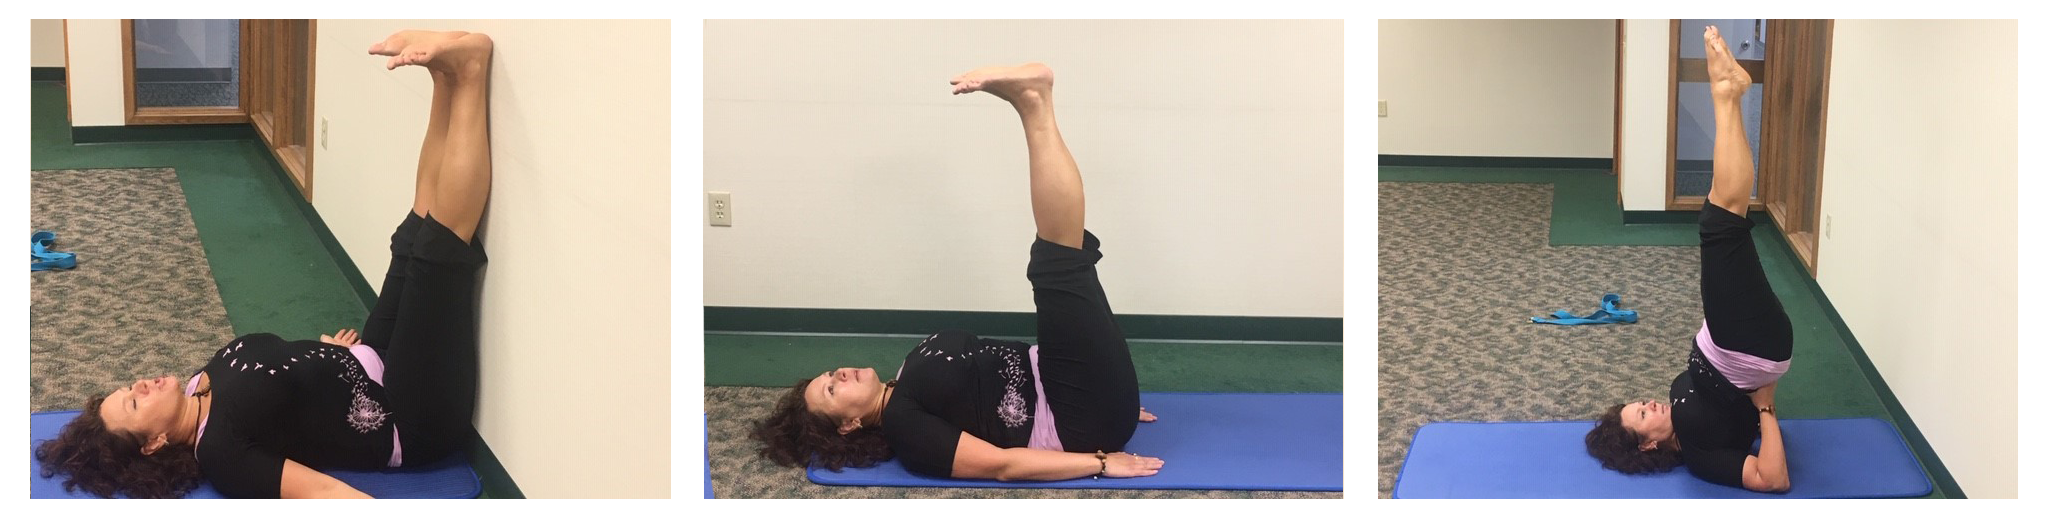 6 Best Yoga Poses for Knee Pain Relief with Easy Modifications - Fitsri Yoga